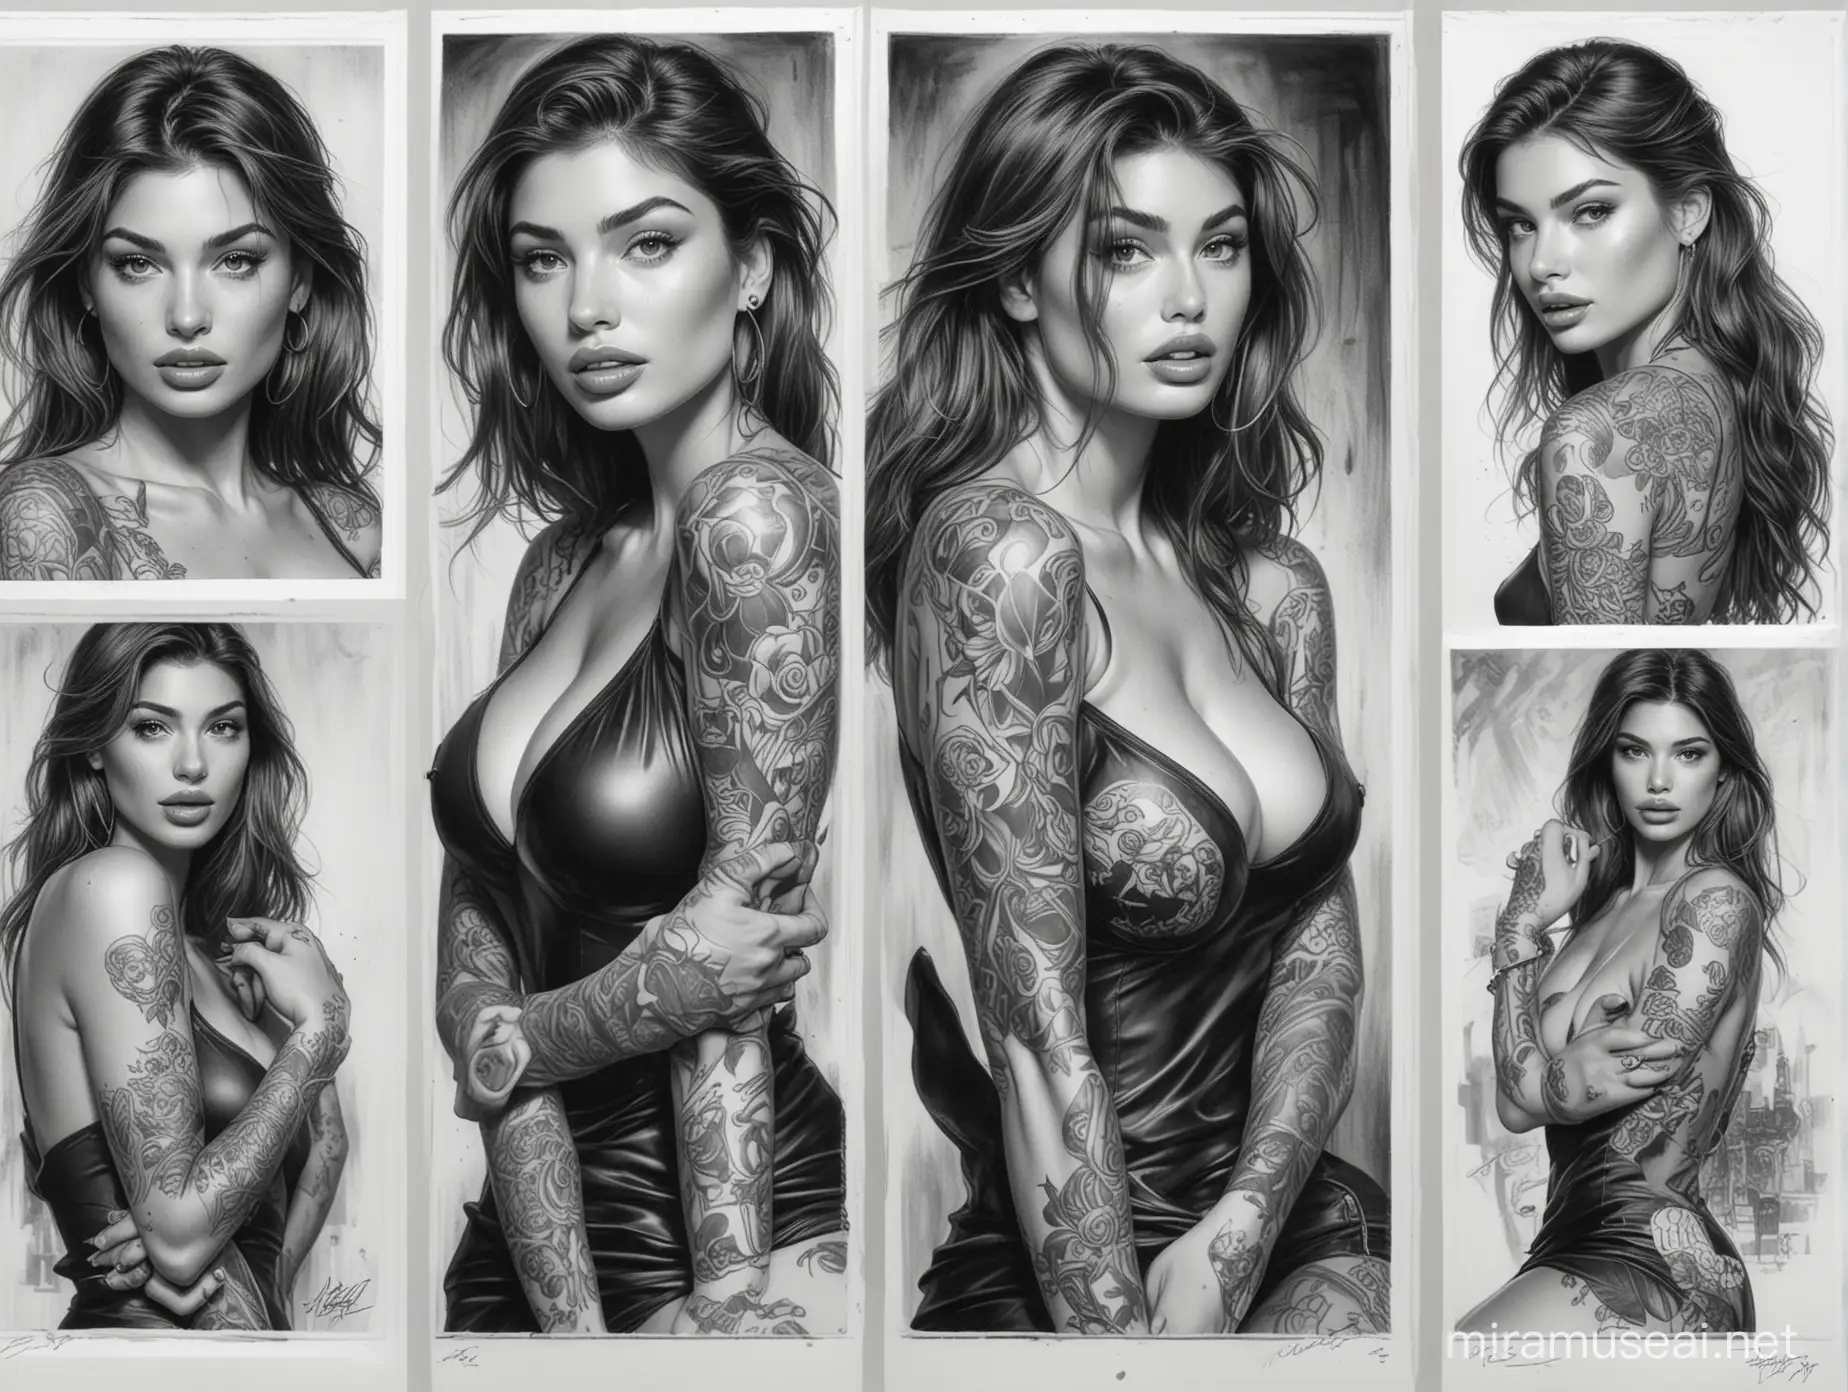 90's comic style, Black and White, Master pencil sketches, Storyboard sheet with various sketches, Portraits of a sexy brunette woman, Camila Morrone, Covered in tattoos, Tiny short black dress, Night time. White Background, White border. Zoom out view. Marvel comic style. High resolution.  High contrast.